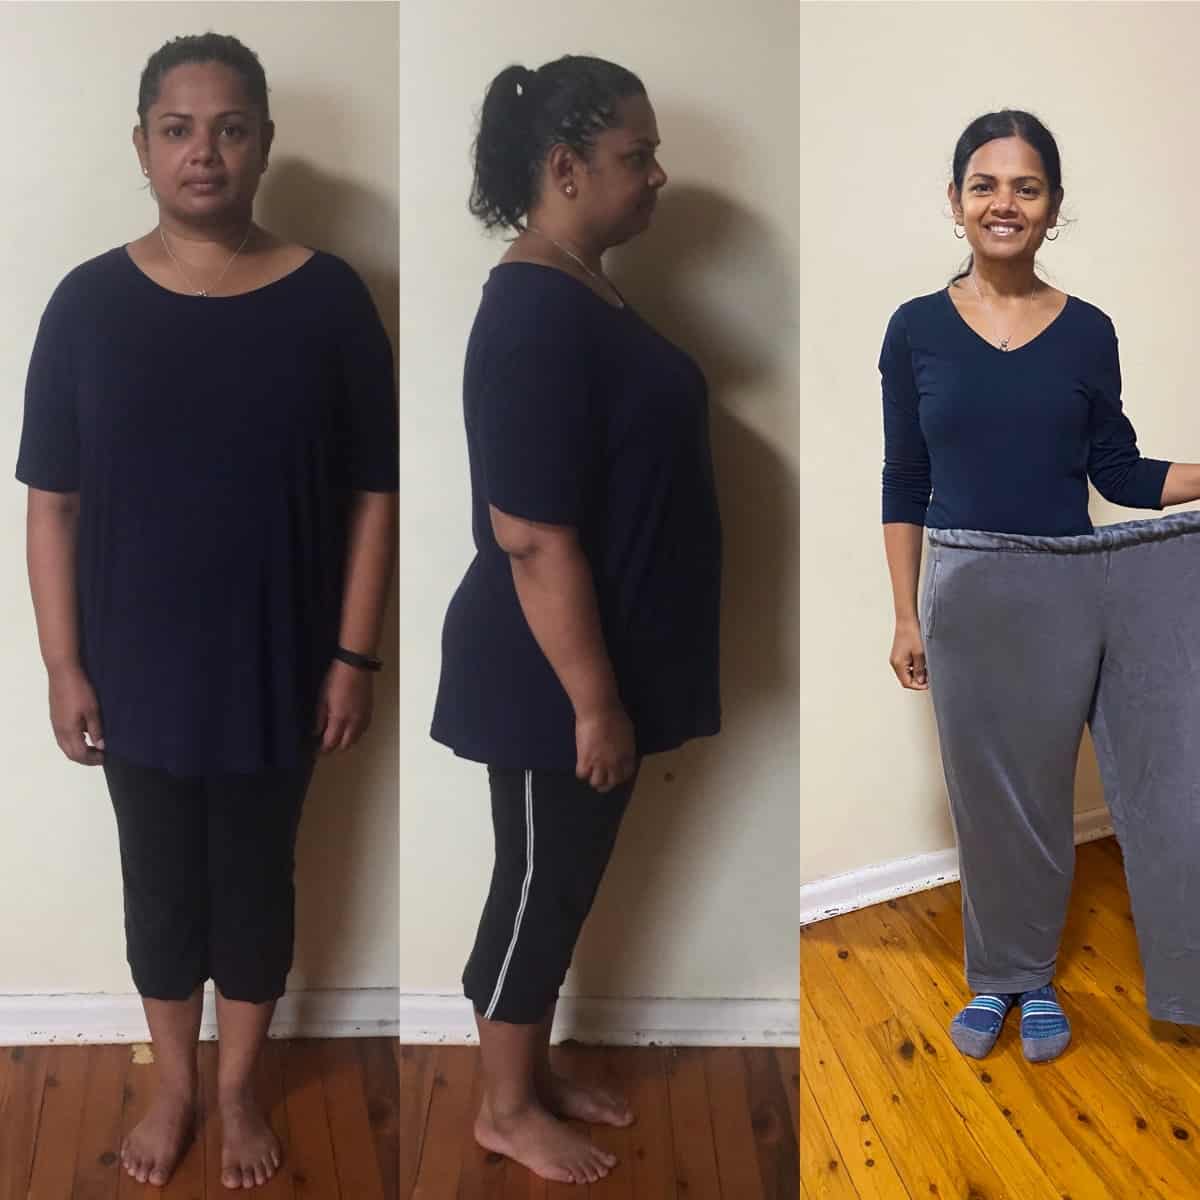 Veronica A. before and after weight loss.